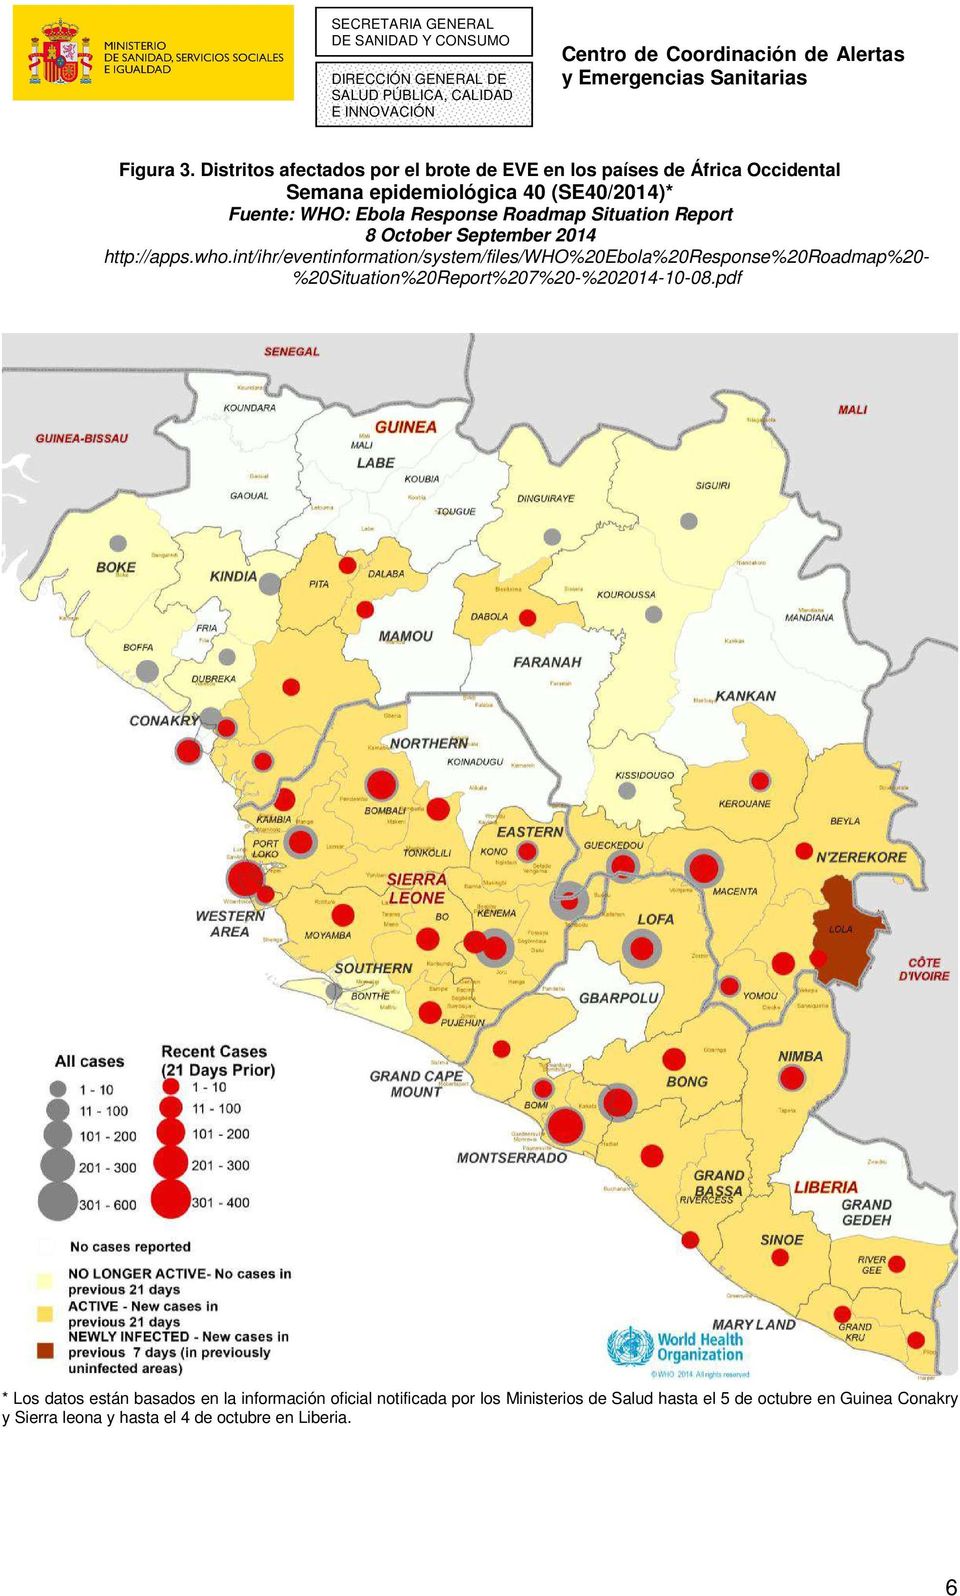 Ebola Response Roadmap Situation Report 8 October September 2014 http://apps.who.